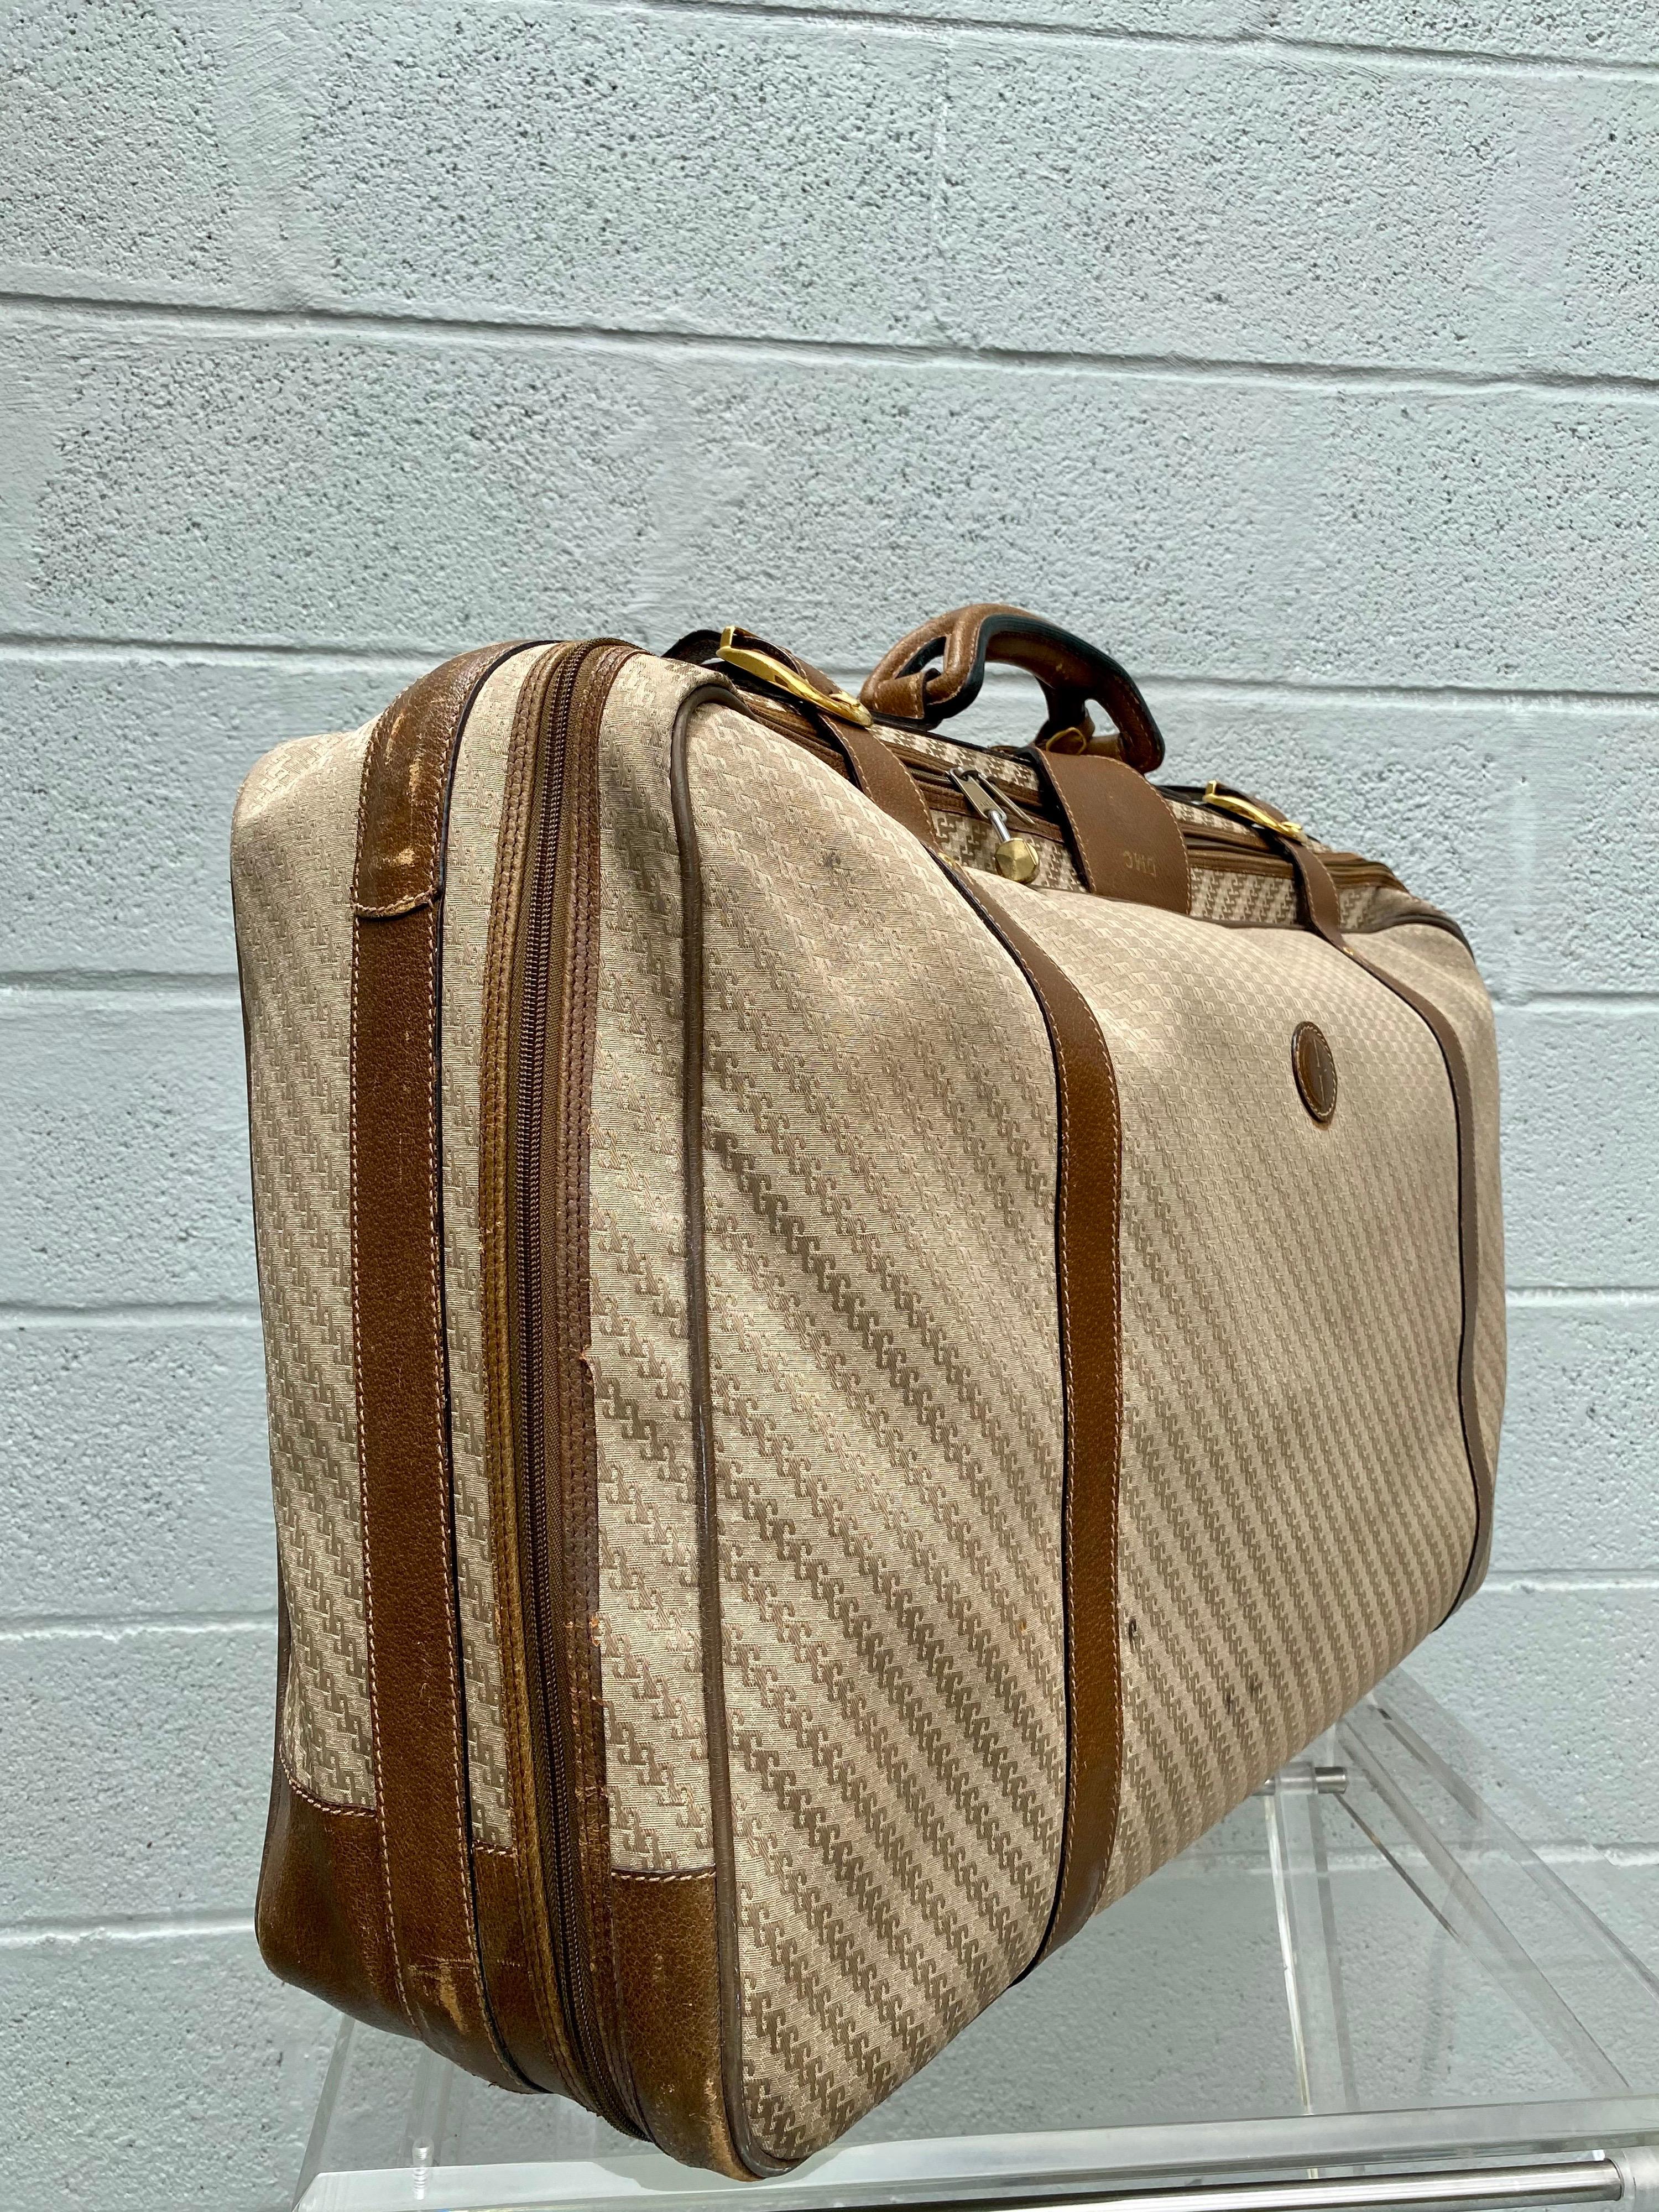 The classic stylish Gucci luggage is crafted of signature GG monogram on canvas. Extremely rare vintage luggage from the 1970's. The bag features leather trim, rolled leather top handle, and flap lock closure. The zippers open to a spacious fabric